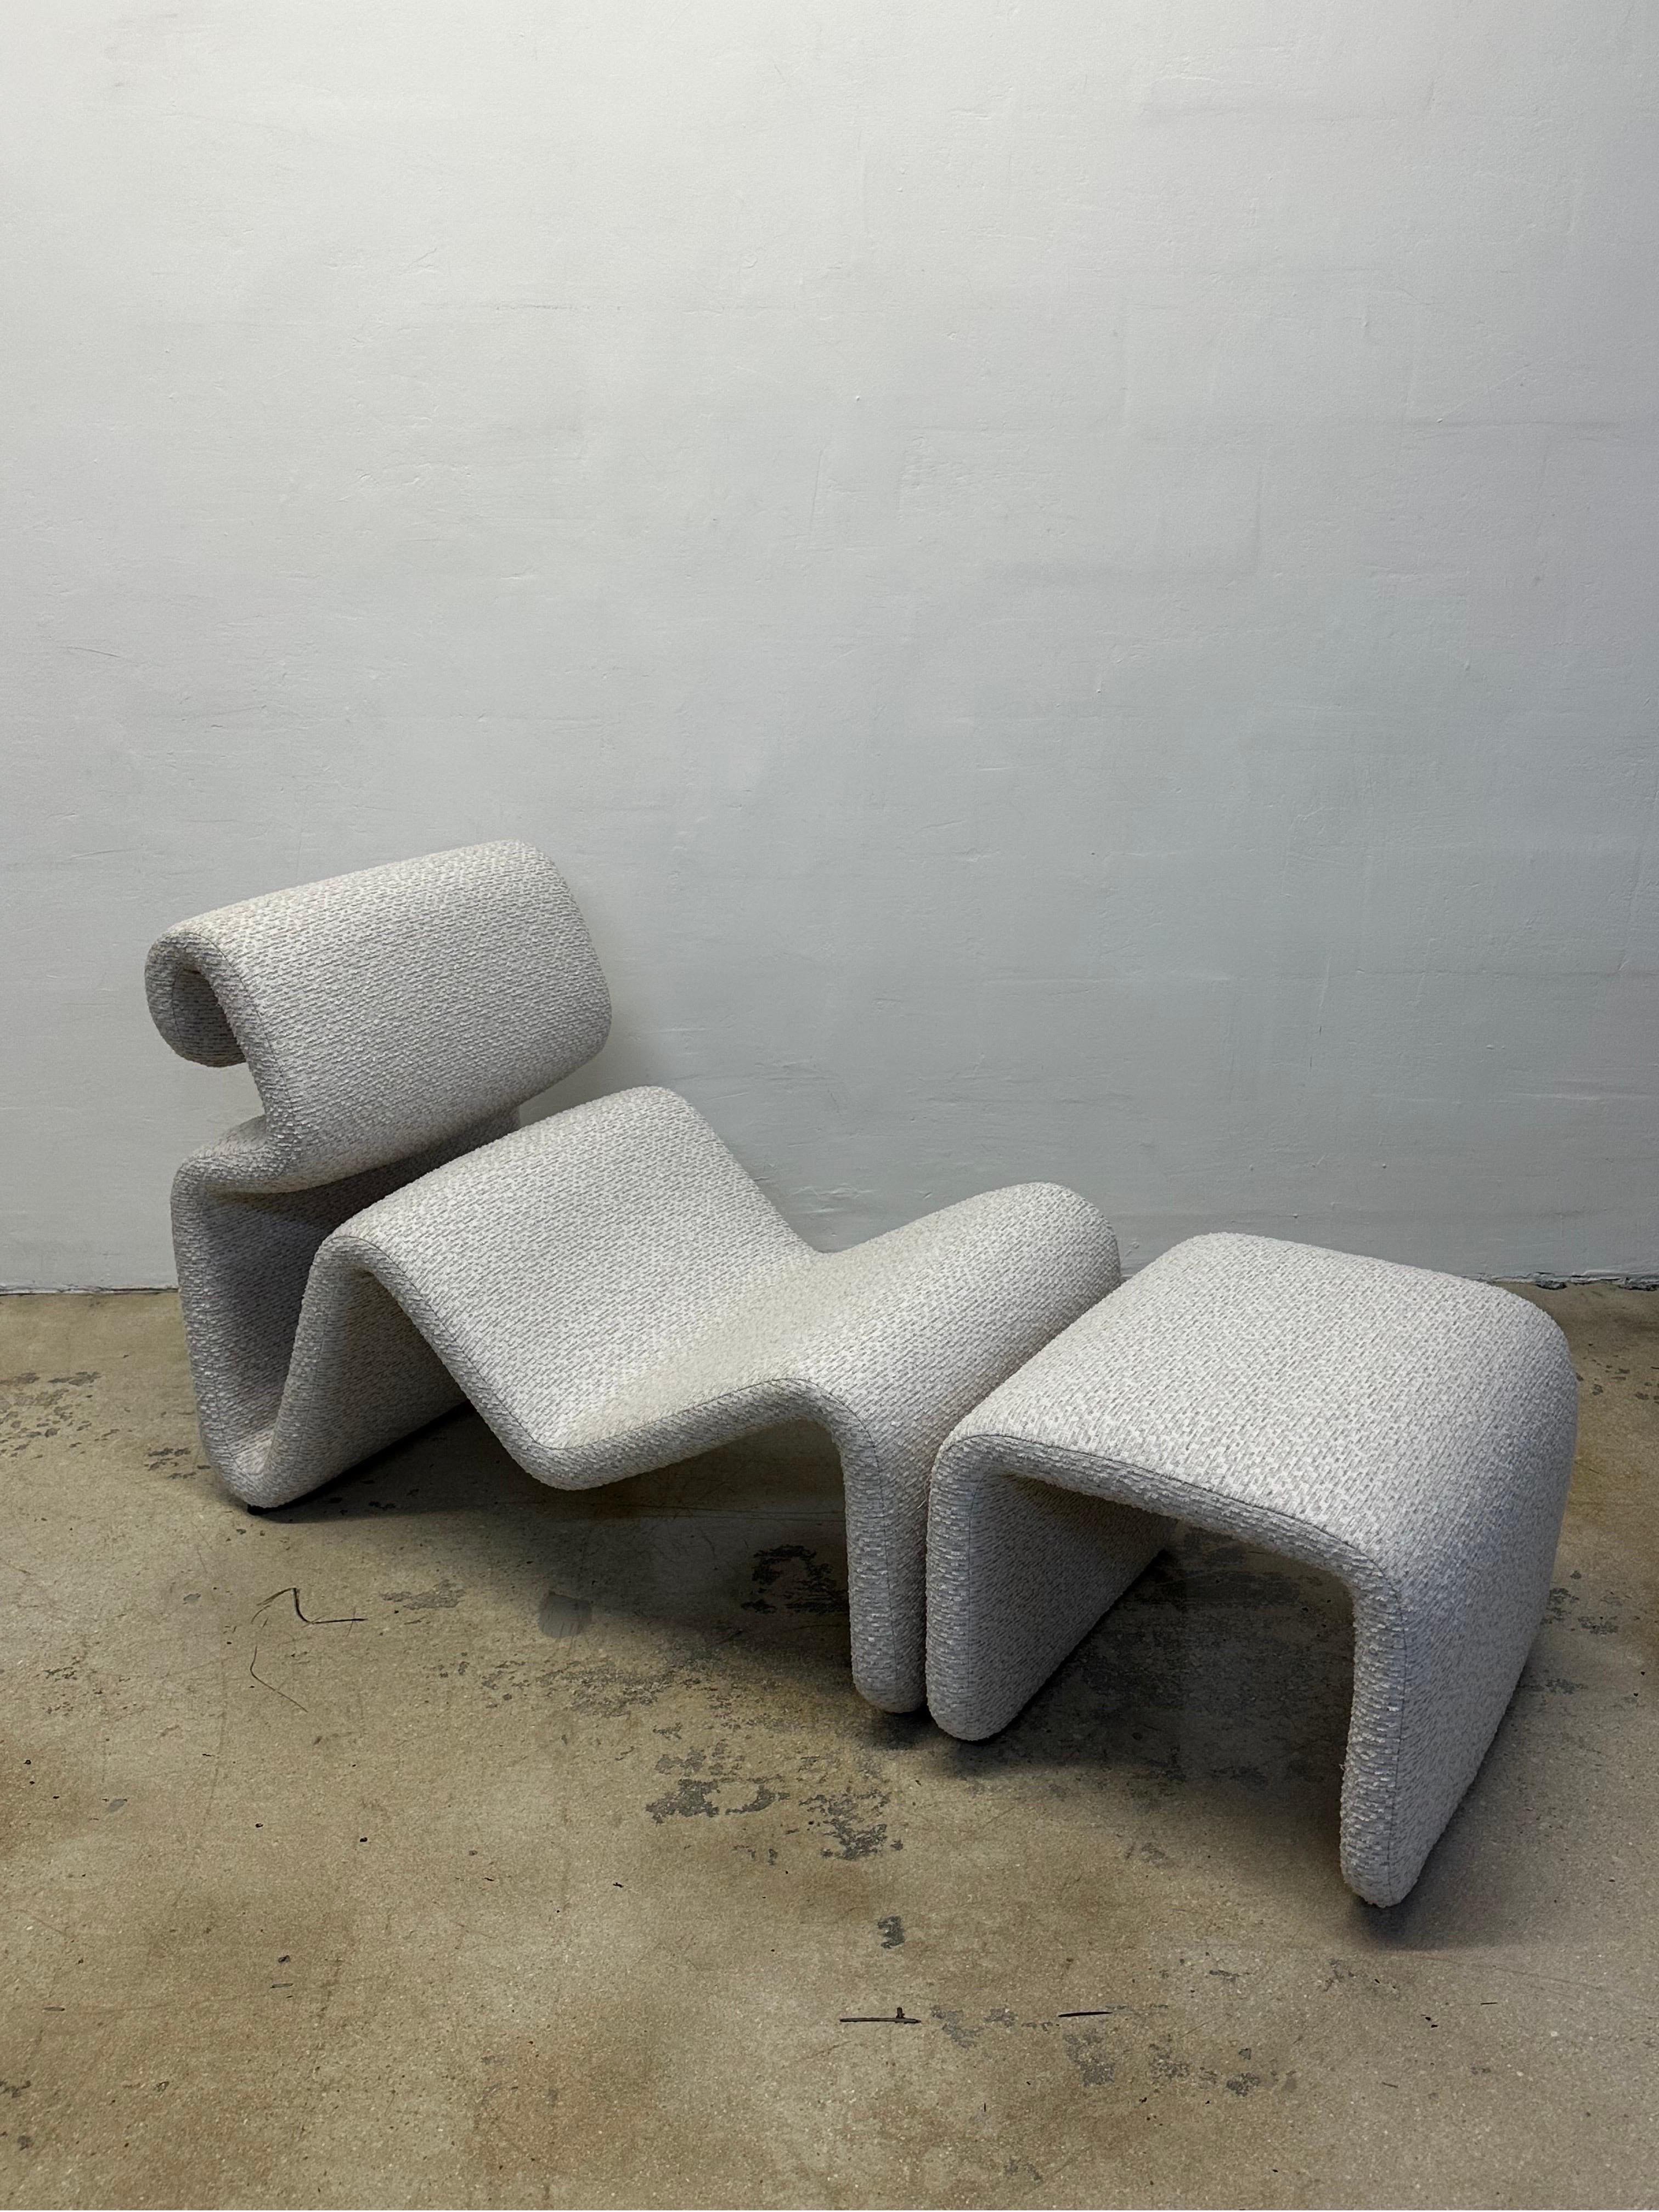 Mid-Century Etcetera lounge chair and footrest designed by Jan Ekselius for JOC Sweden, 1970s.  Recently upholstered by original owner in a high-end textured off-white cotton fabric and new foam.

Dimensions
Chair : W24” D43” H31”
Footrest: W24”